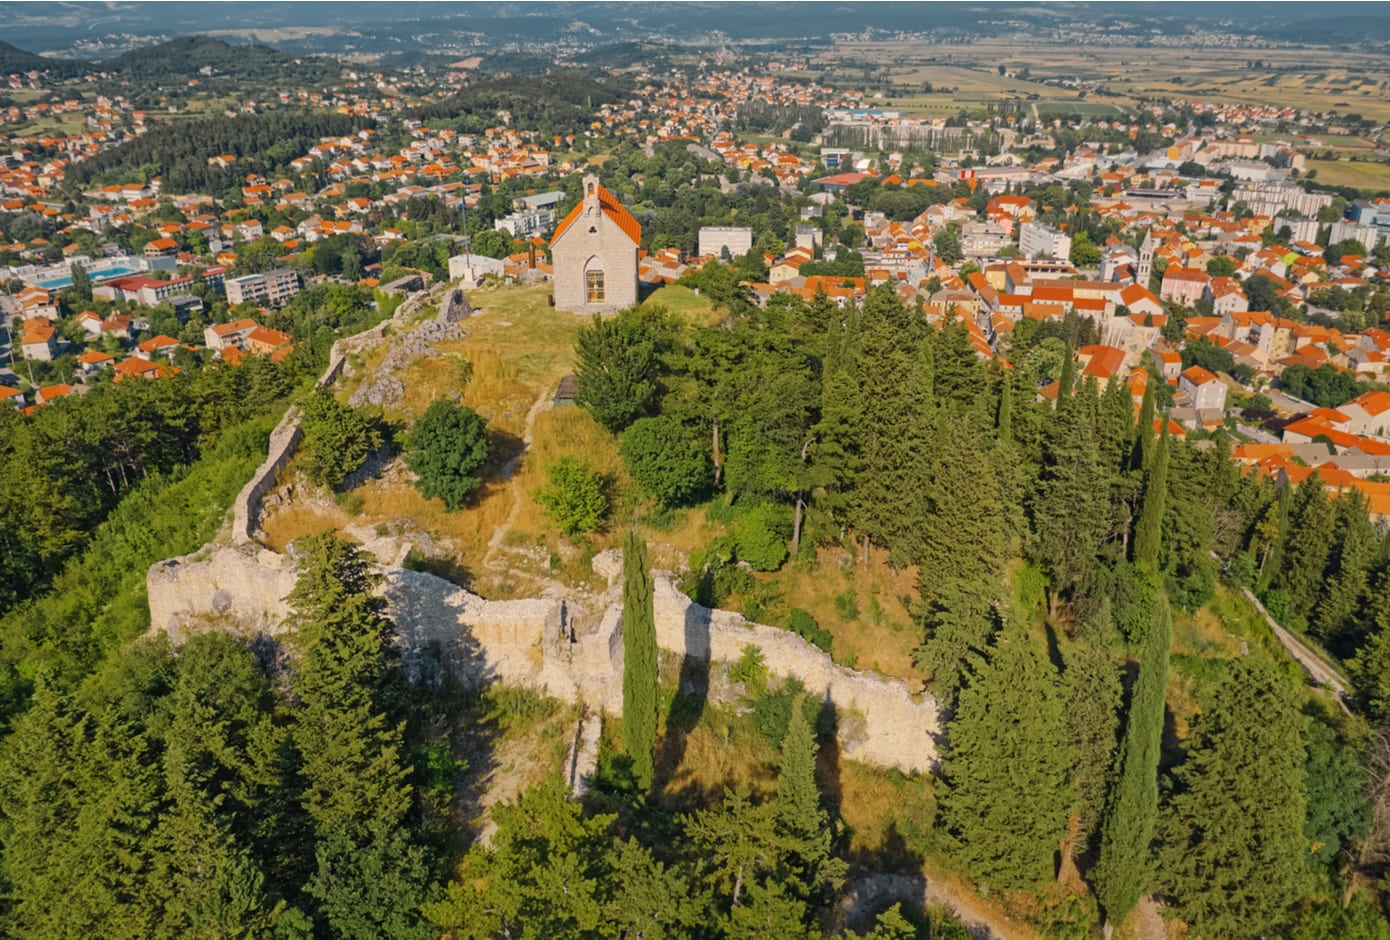 Aerial view of small picturesque town of Sinj in Croatia.
